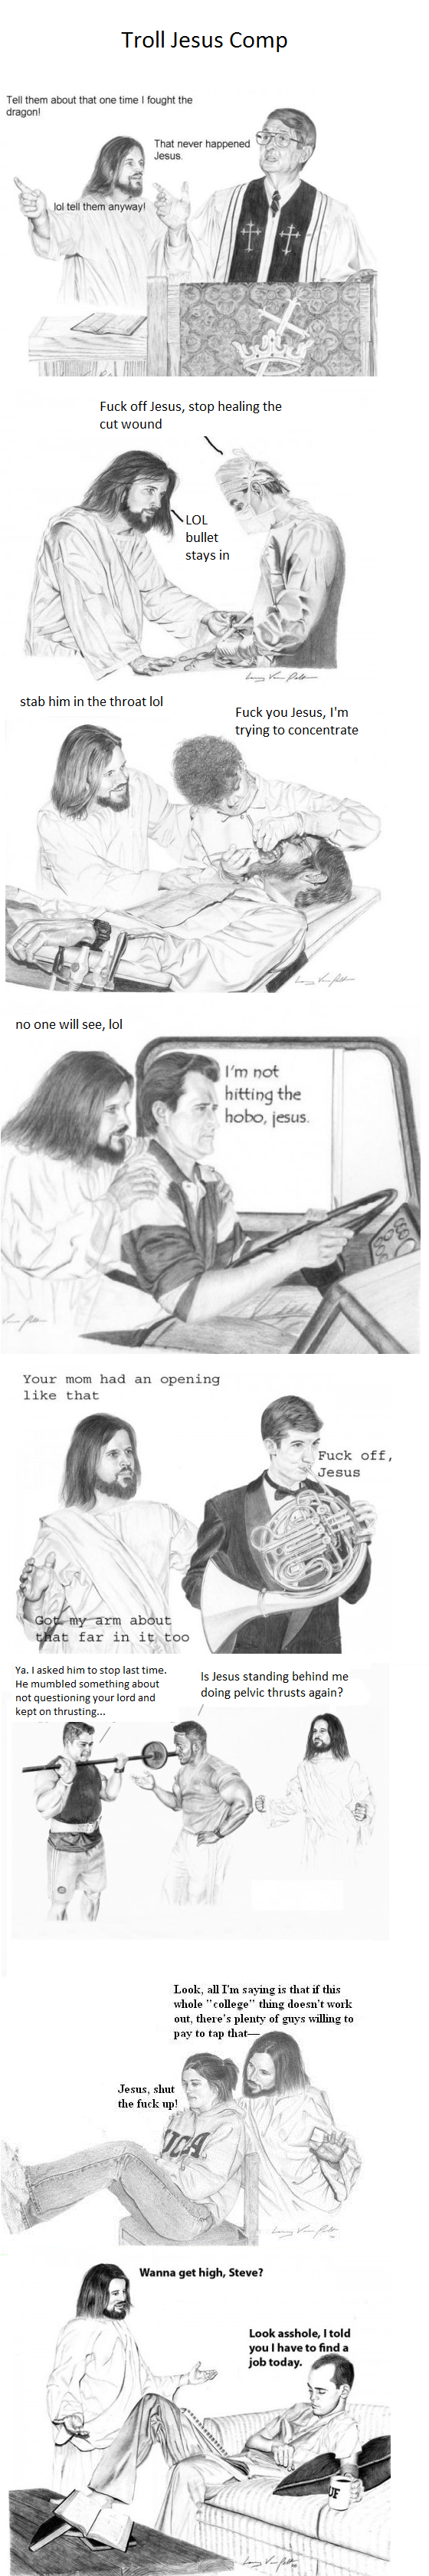 Troll Jesus. . Troll Jesus Comp Tell them about that one time I fought the dragon! Fuck off Jesus, stop healing the cut wound Fuck you Jesus, I' m trying to con